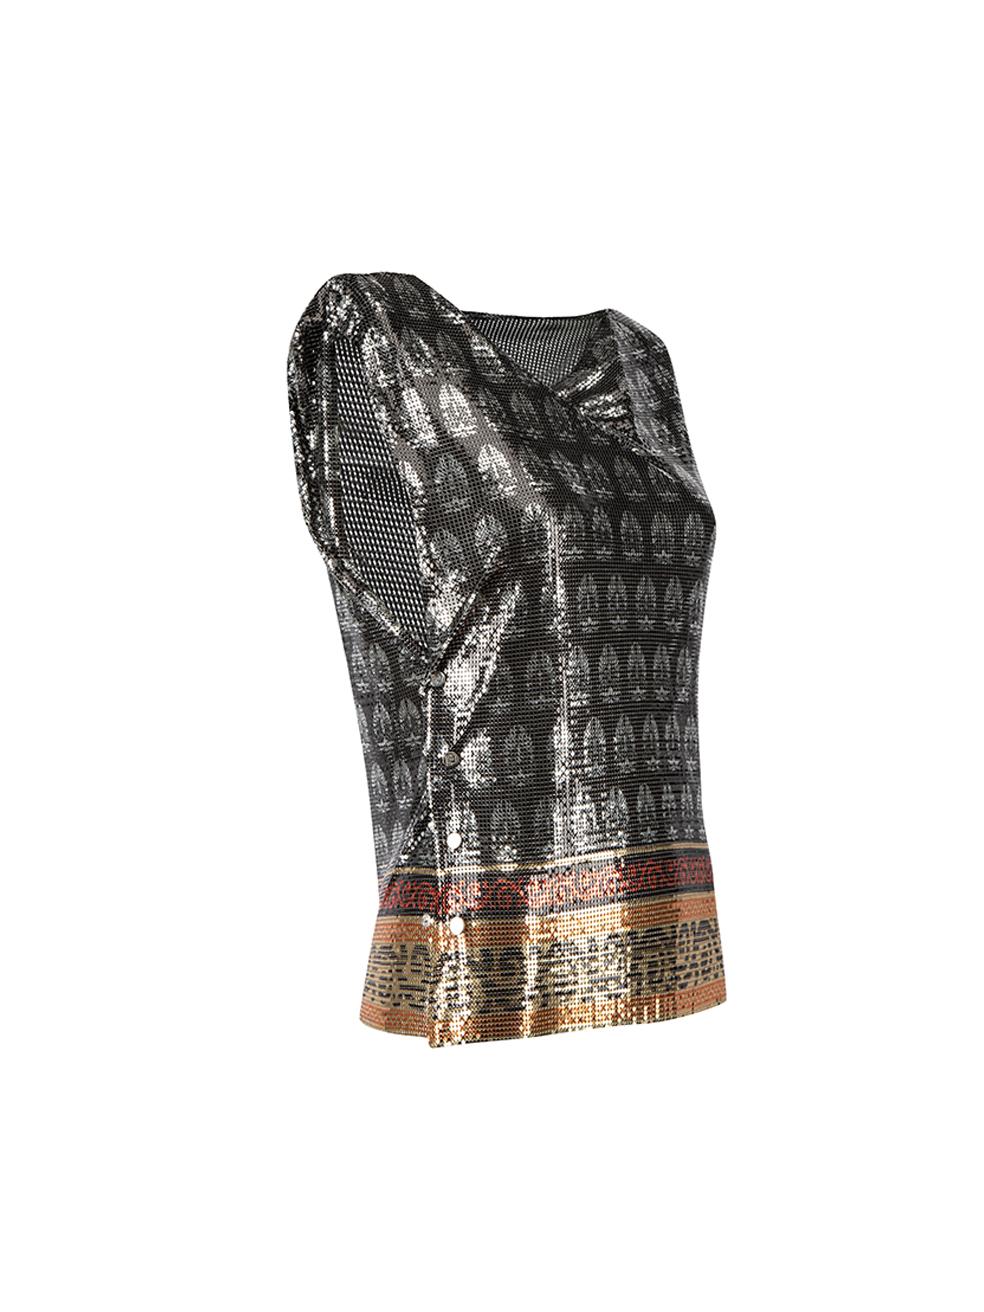 CONDITION is Never Worn. No visible wear to top is evident on this used Paco Rabanne designer resale item. 



Details


Metallic

Chainmail

Sleeveless top

Motif pattern

Bateau drape neckline

Side snap button closure





Made in